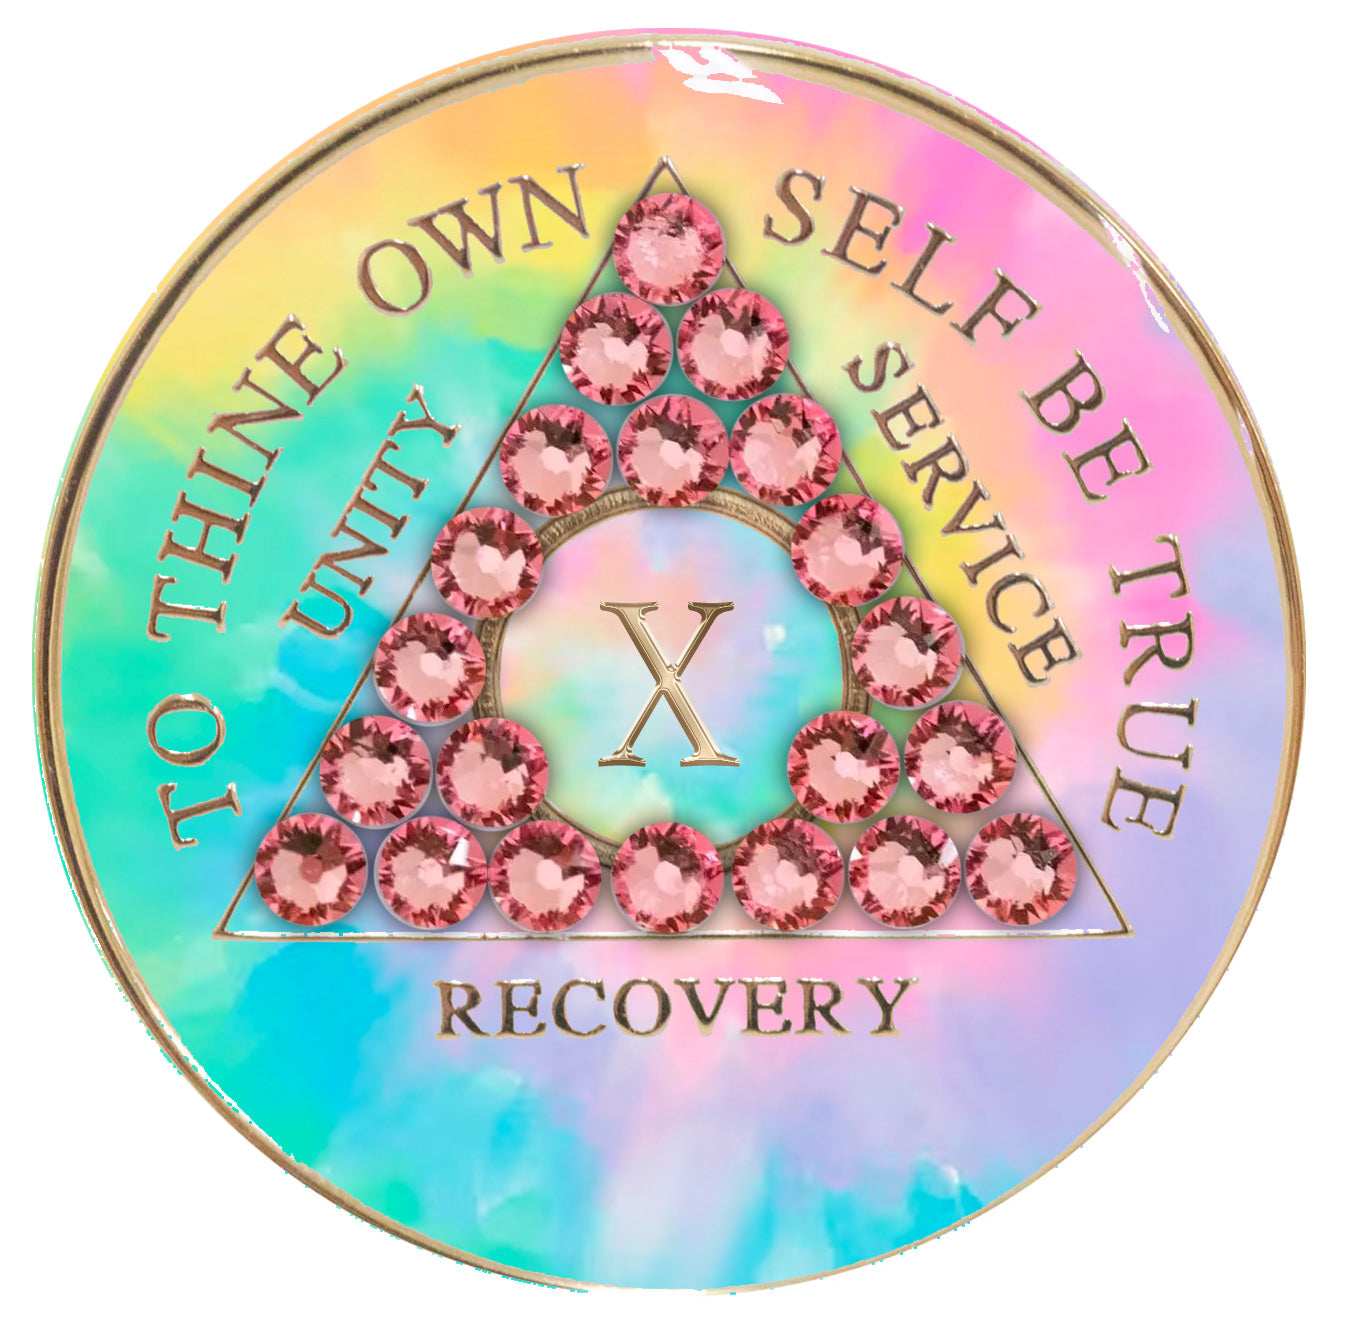 10 year AA medallion pastel tie-dye representing a psychic change that is needed in the recovery journey, with twenty-one light rose genuine crystals, pink, blue, yellow, and green, in the shape of the triangle, with the AA moto and roman numeral embossed in 14k gold-plated brass, the medallion is sealed with resin for a glossy, scratch free finish.